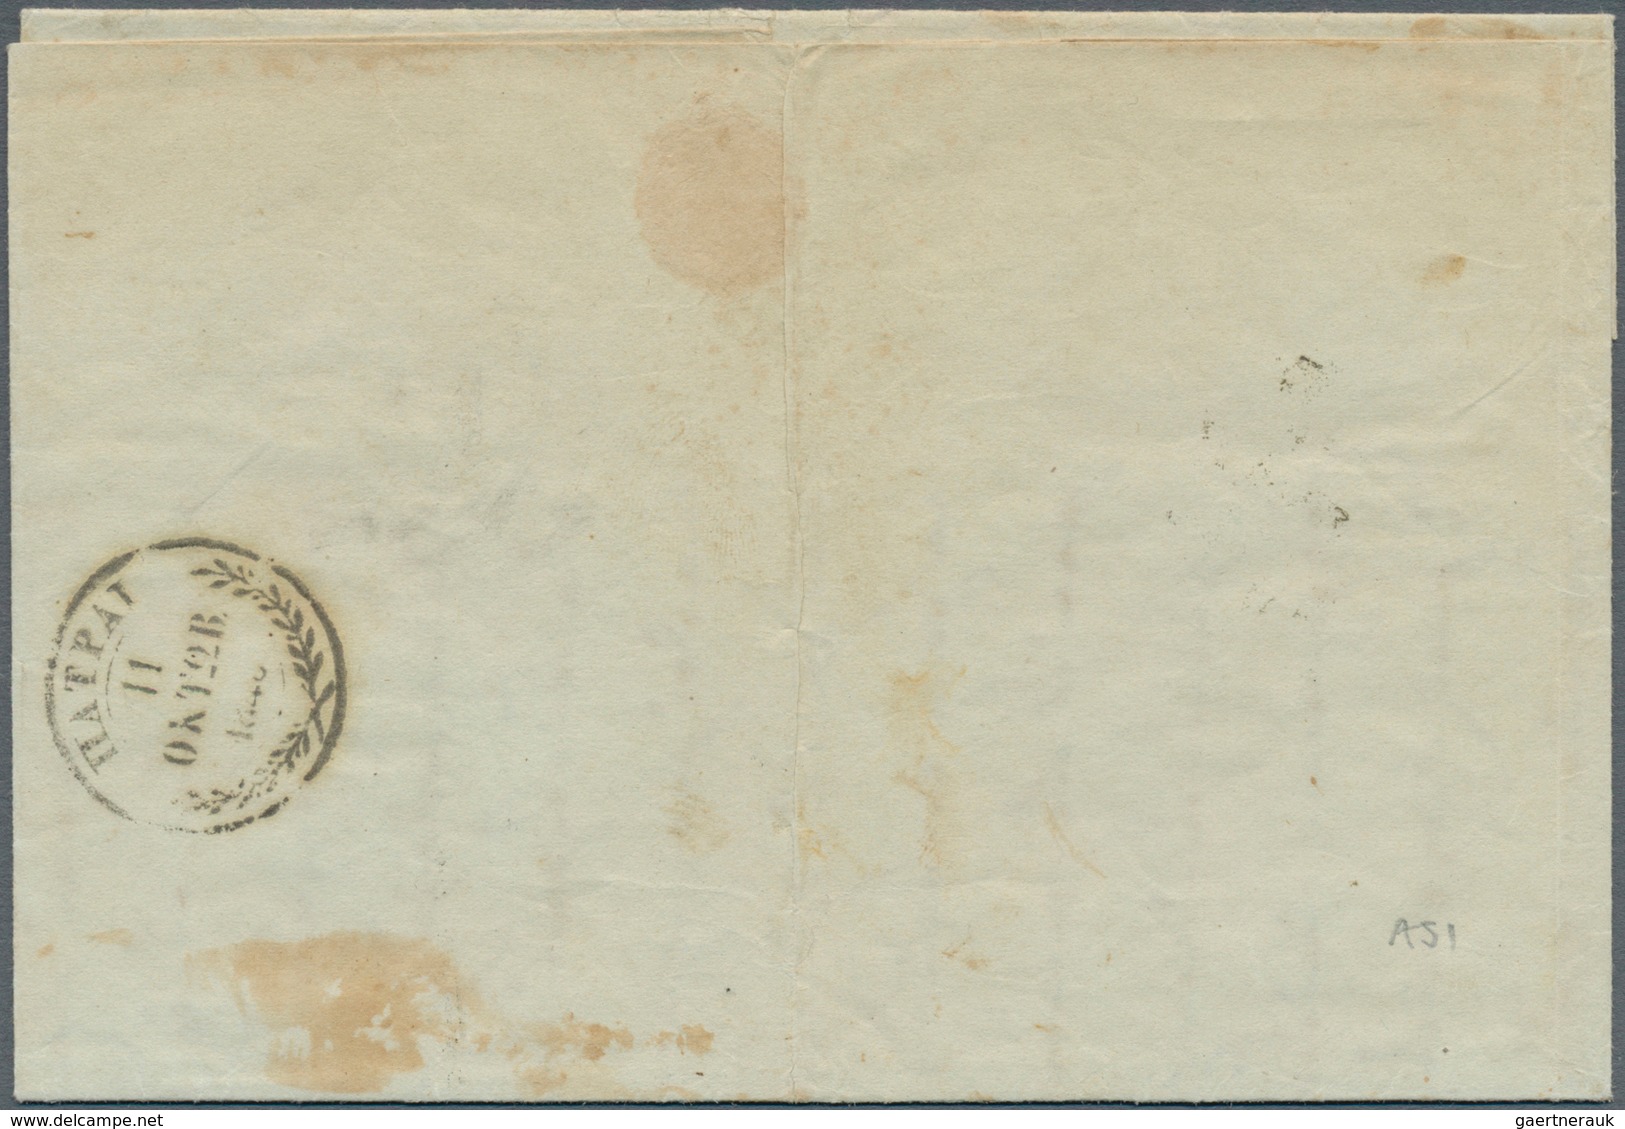 14280 Ionische Inseln - Vorphilatelie: 1845, Folded Letter With Black Crowned Double Circle PAID AT CORFU - Ionische Inseln